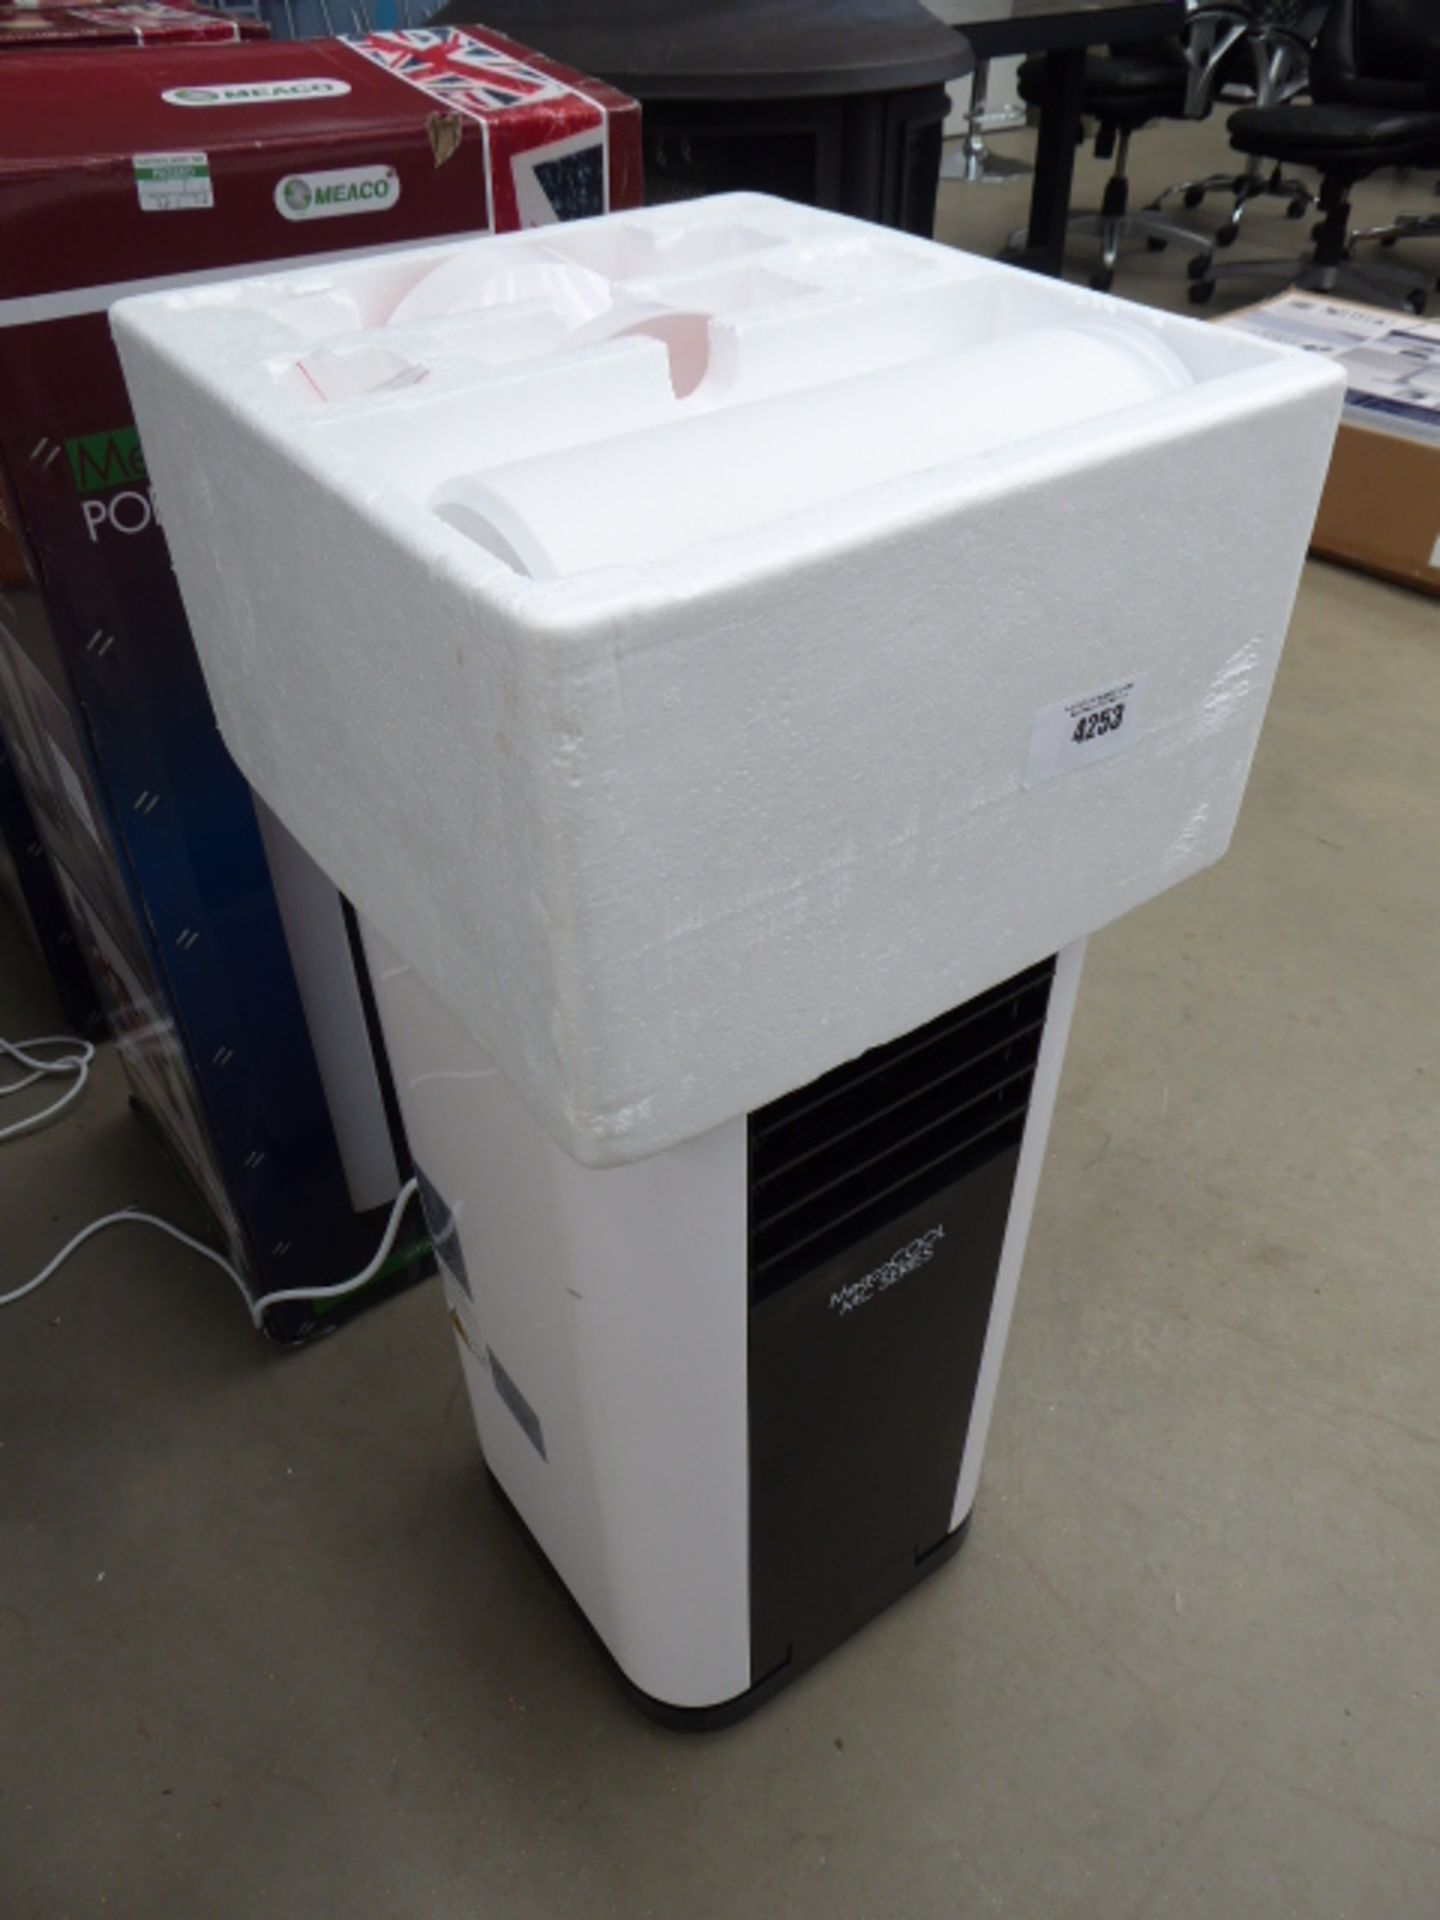 Unboxed Meaco portable air conditioner and heater